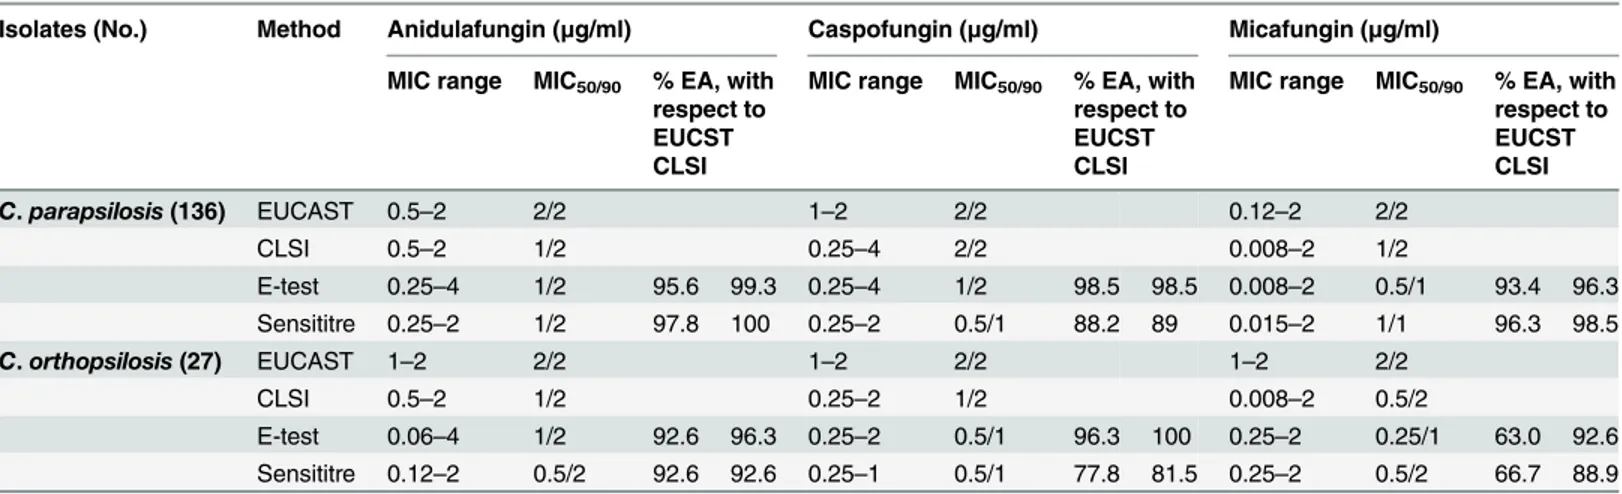 Table 2. MICs and EAs of the E-test and Sensititre methods compared with those of the CLSI and EUCAST methods.